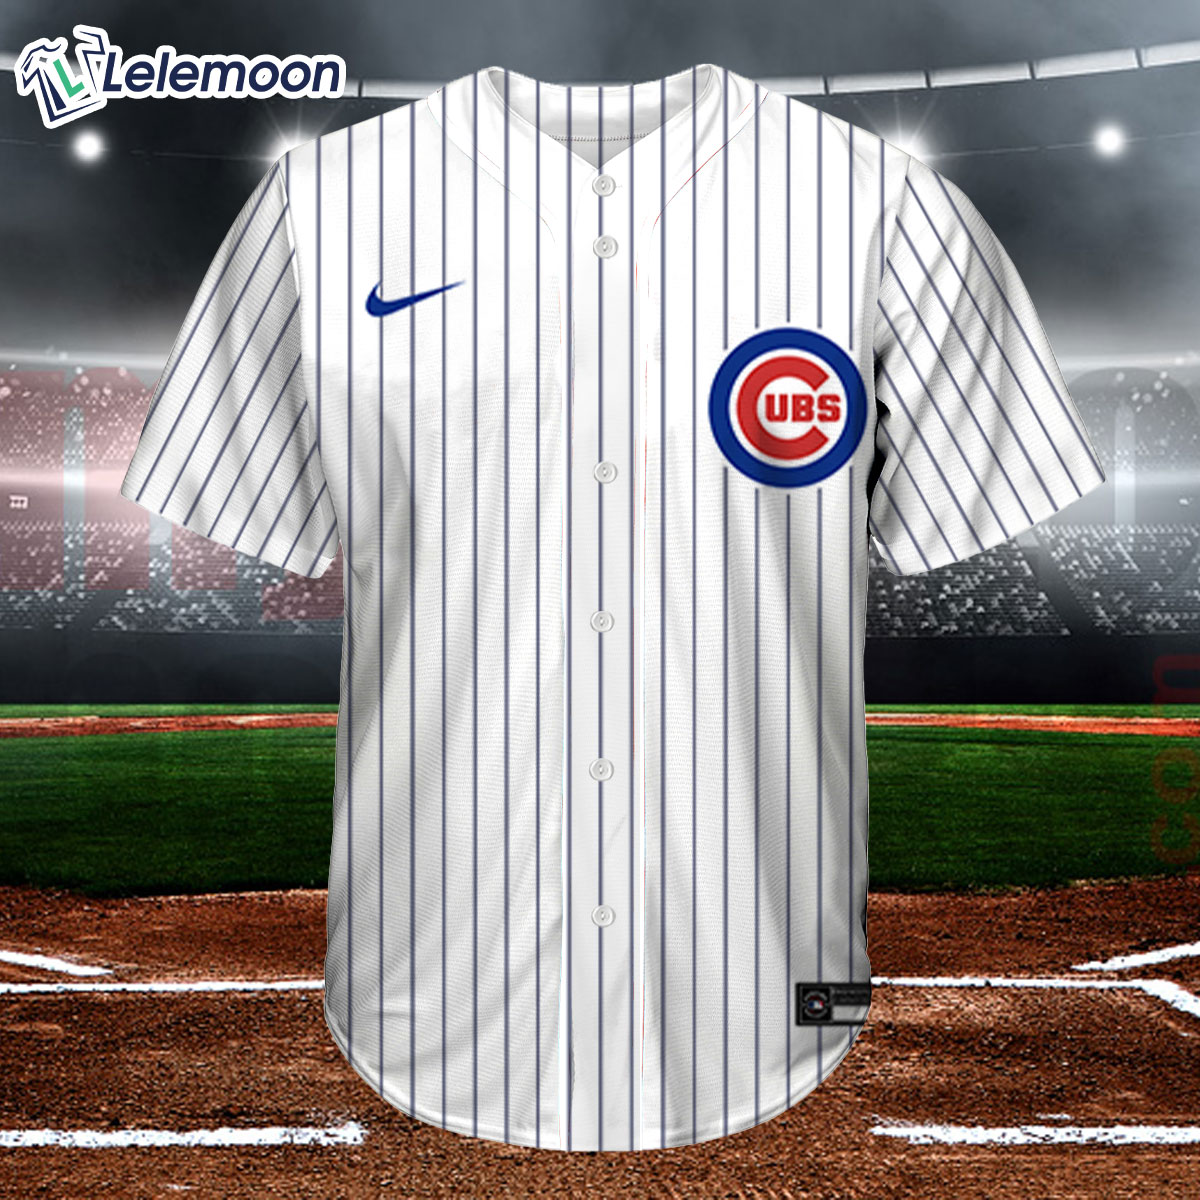 cubs jersey white